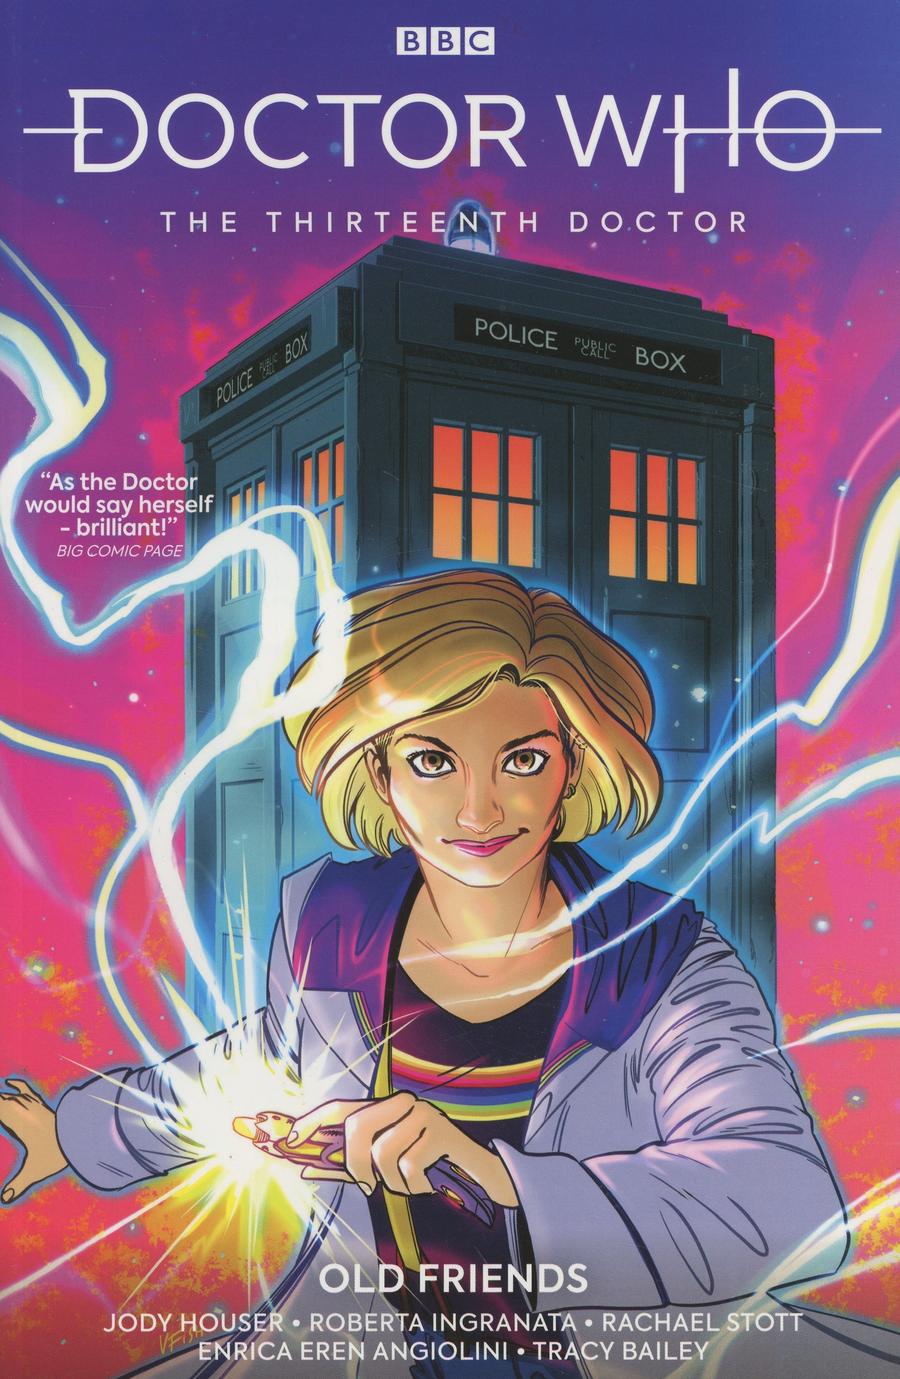 Doctor Who 13th Doctor Vol 3 Old Friends TP